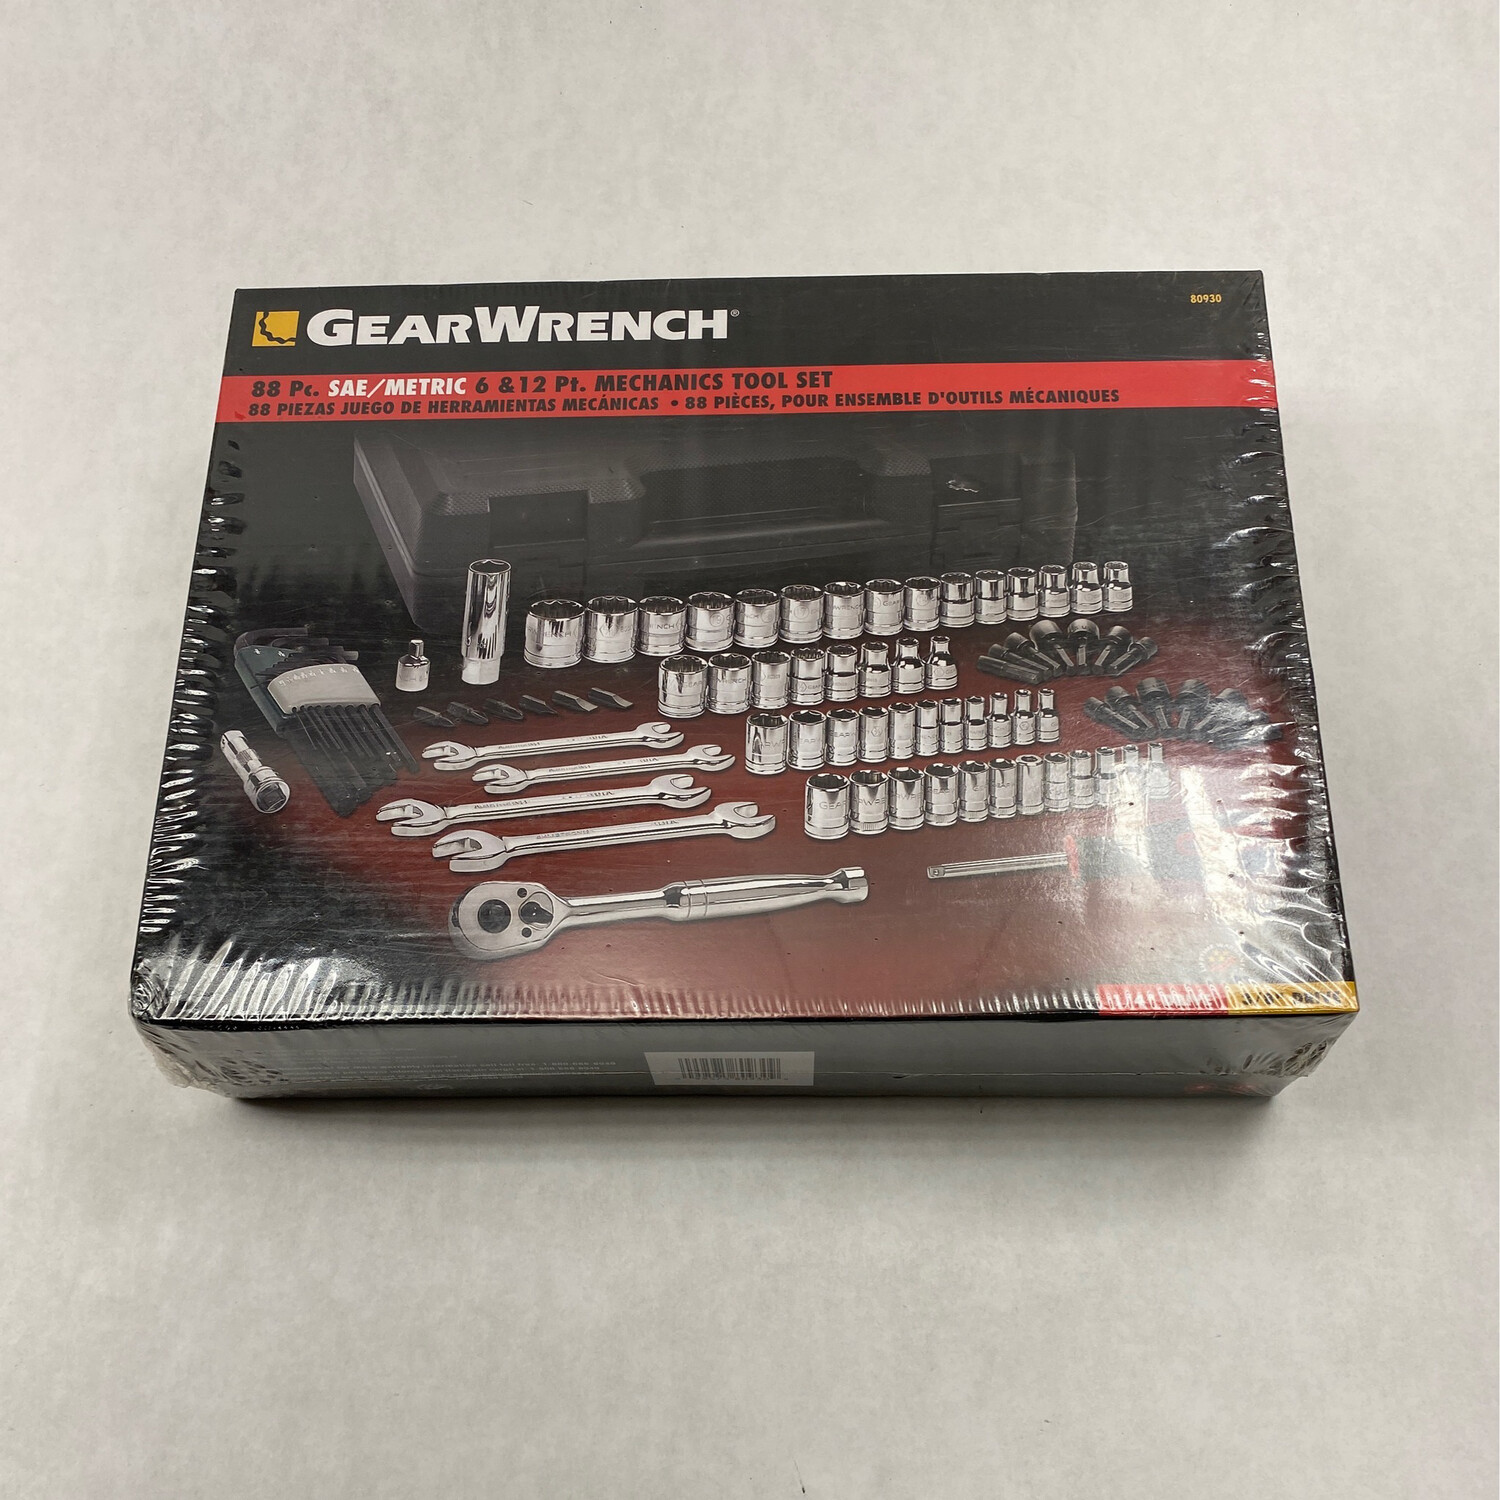 Gearwrench 88 Pc. 1/4” & 3/8” Drive SAE/Metric 6 & 12 Point Mechanical Tool Set, 80930